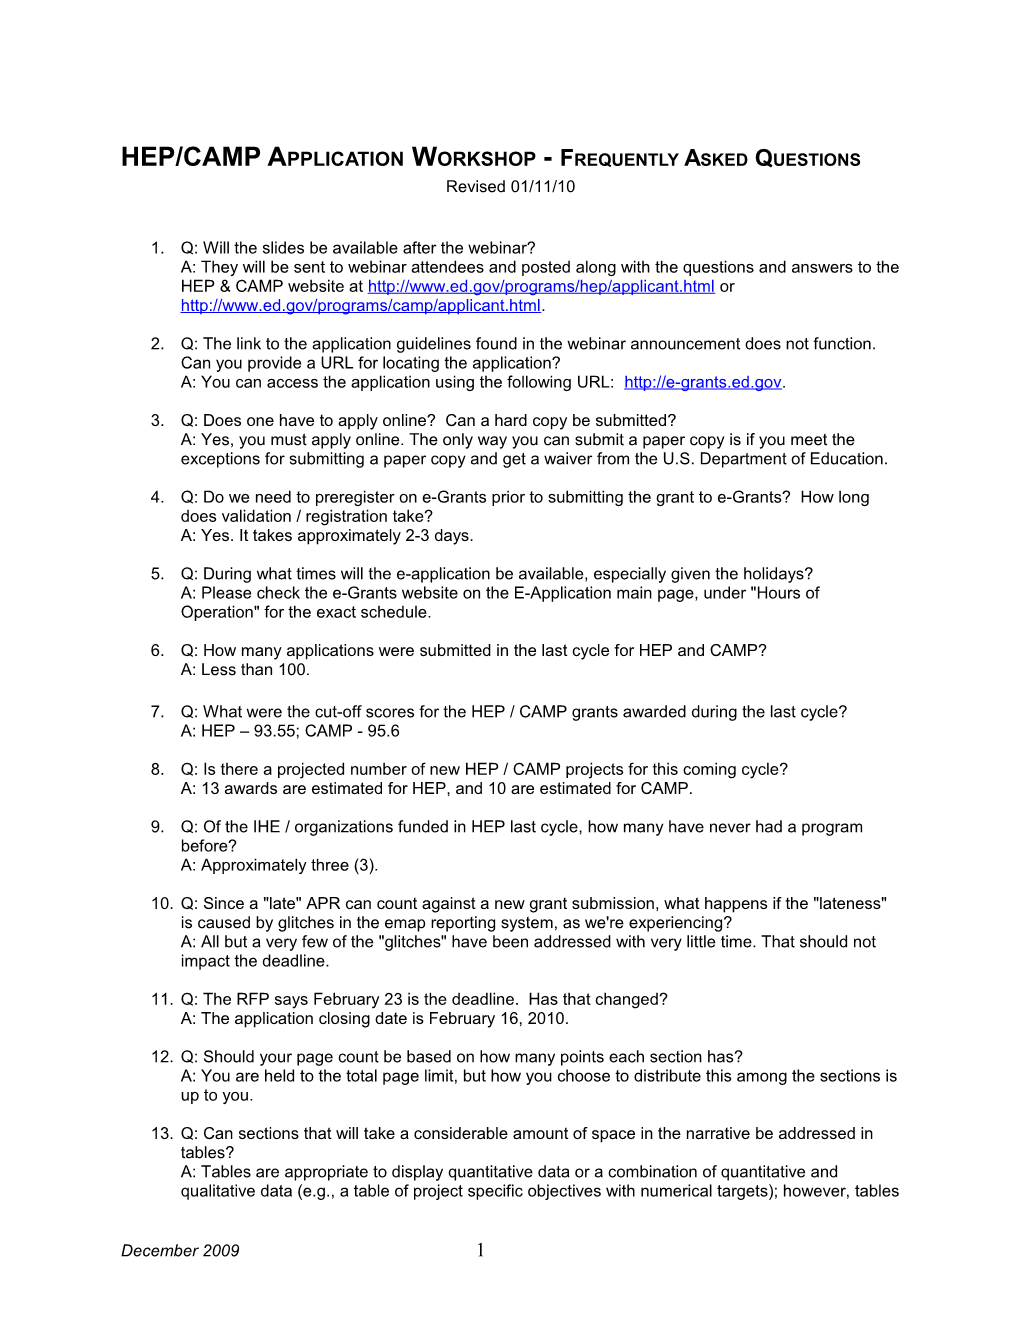 HEP/CAMP Application Workshop Frequently Asked Questions Revised January 11, 2010 (MS WORD)